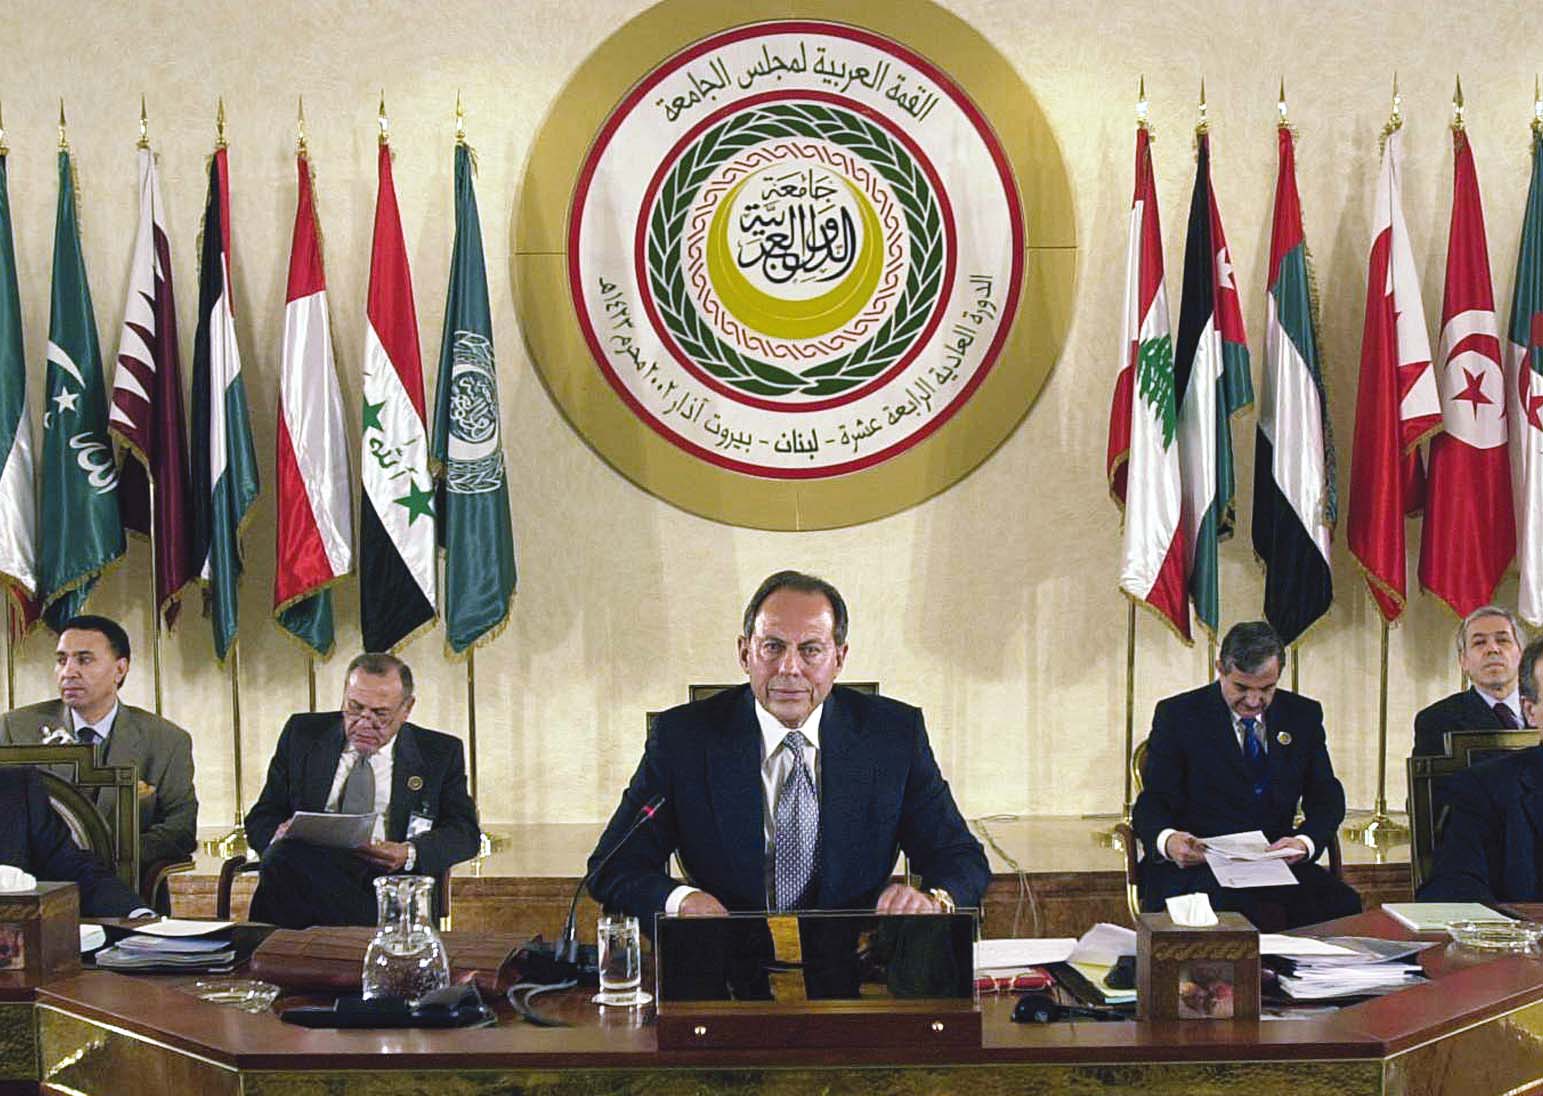 Lebanese President Emile Lahoud, center, at an Arab League Summit in Beirut on March 27, 2002.